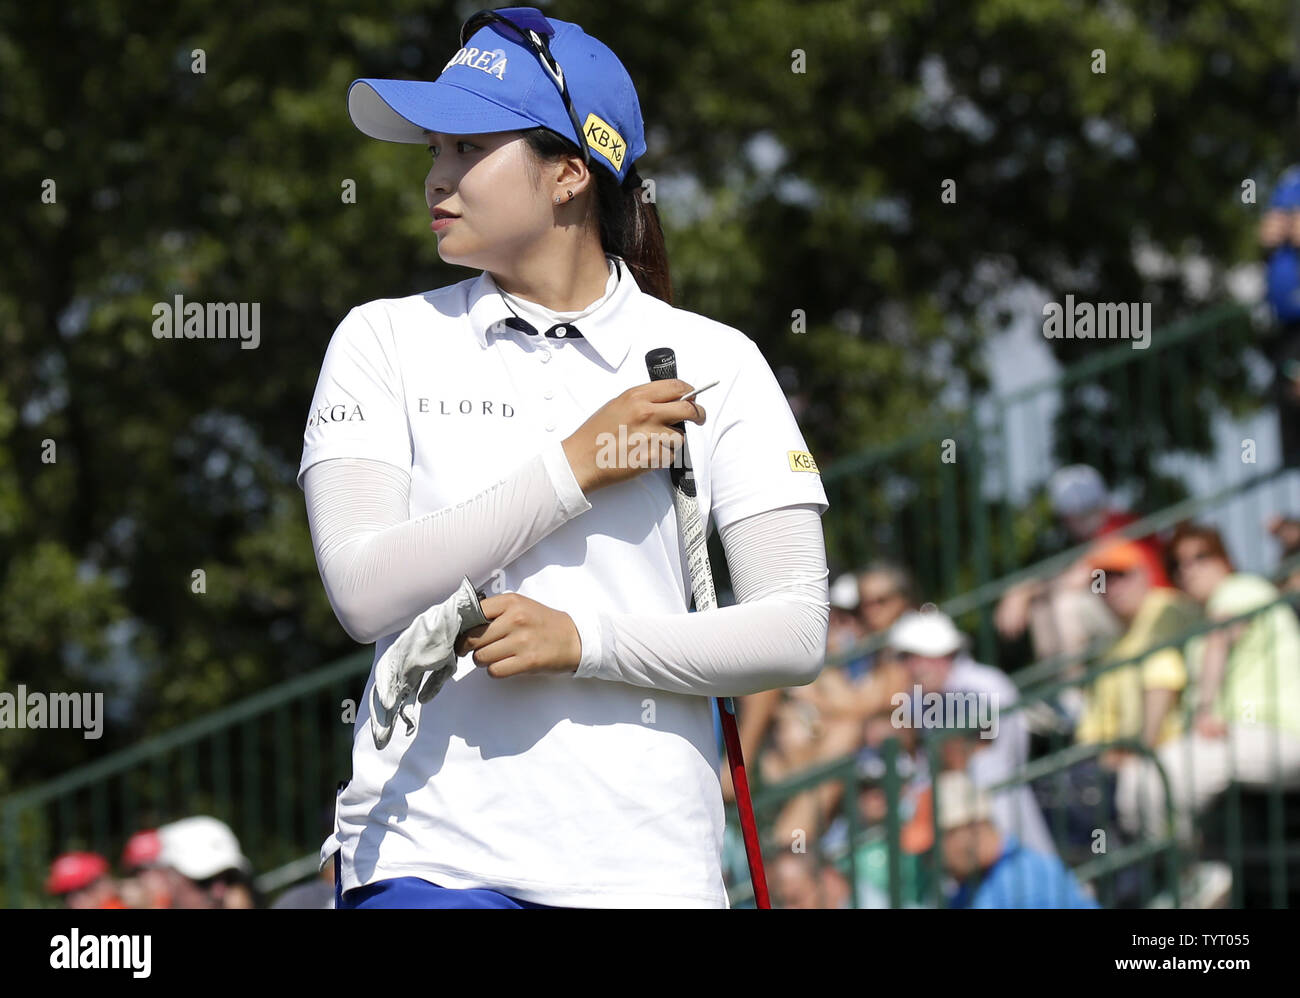 Amature Hye-Jin Choi of South Korea arrives on the 10th hole tee box at Trump National Golf Club for the final round of the LPGA U.S. Women's Open Championship  in Bedminster, NJ on July 14, 2017.     Photo by John Angelillo/UPI Stock Photo